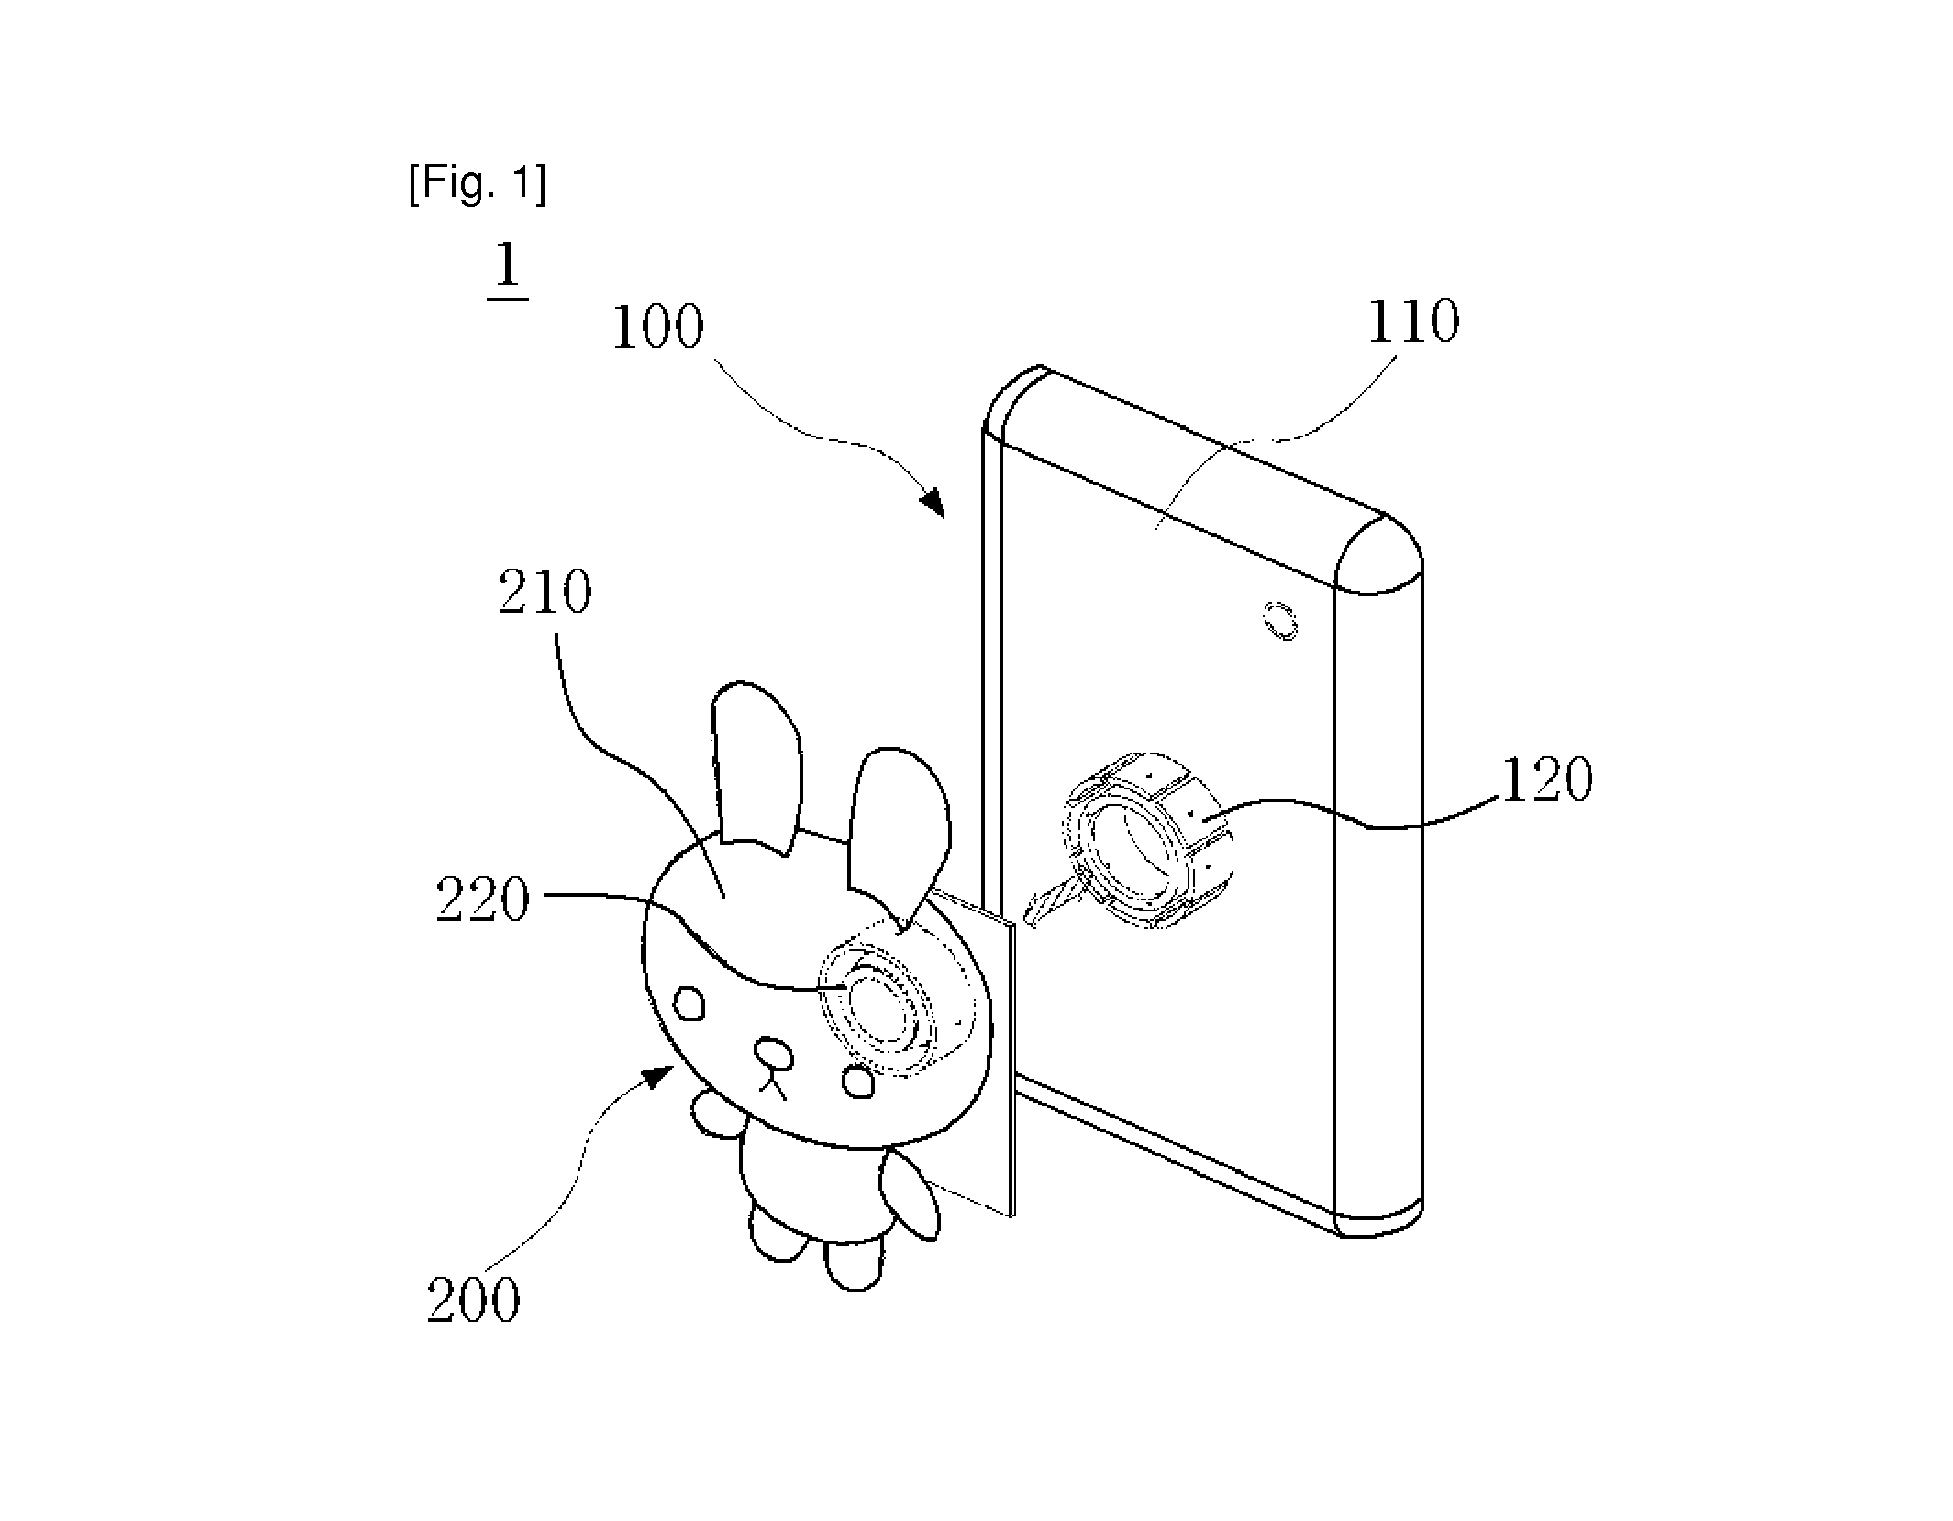 Double-type case coupling a character case having a clicking rotation runction with a smartphone case